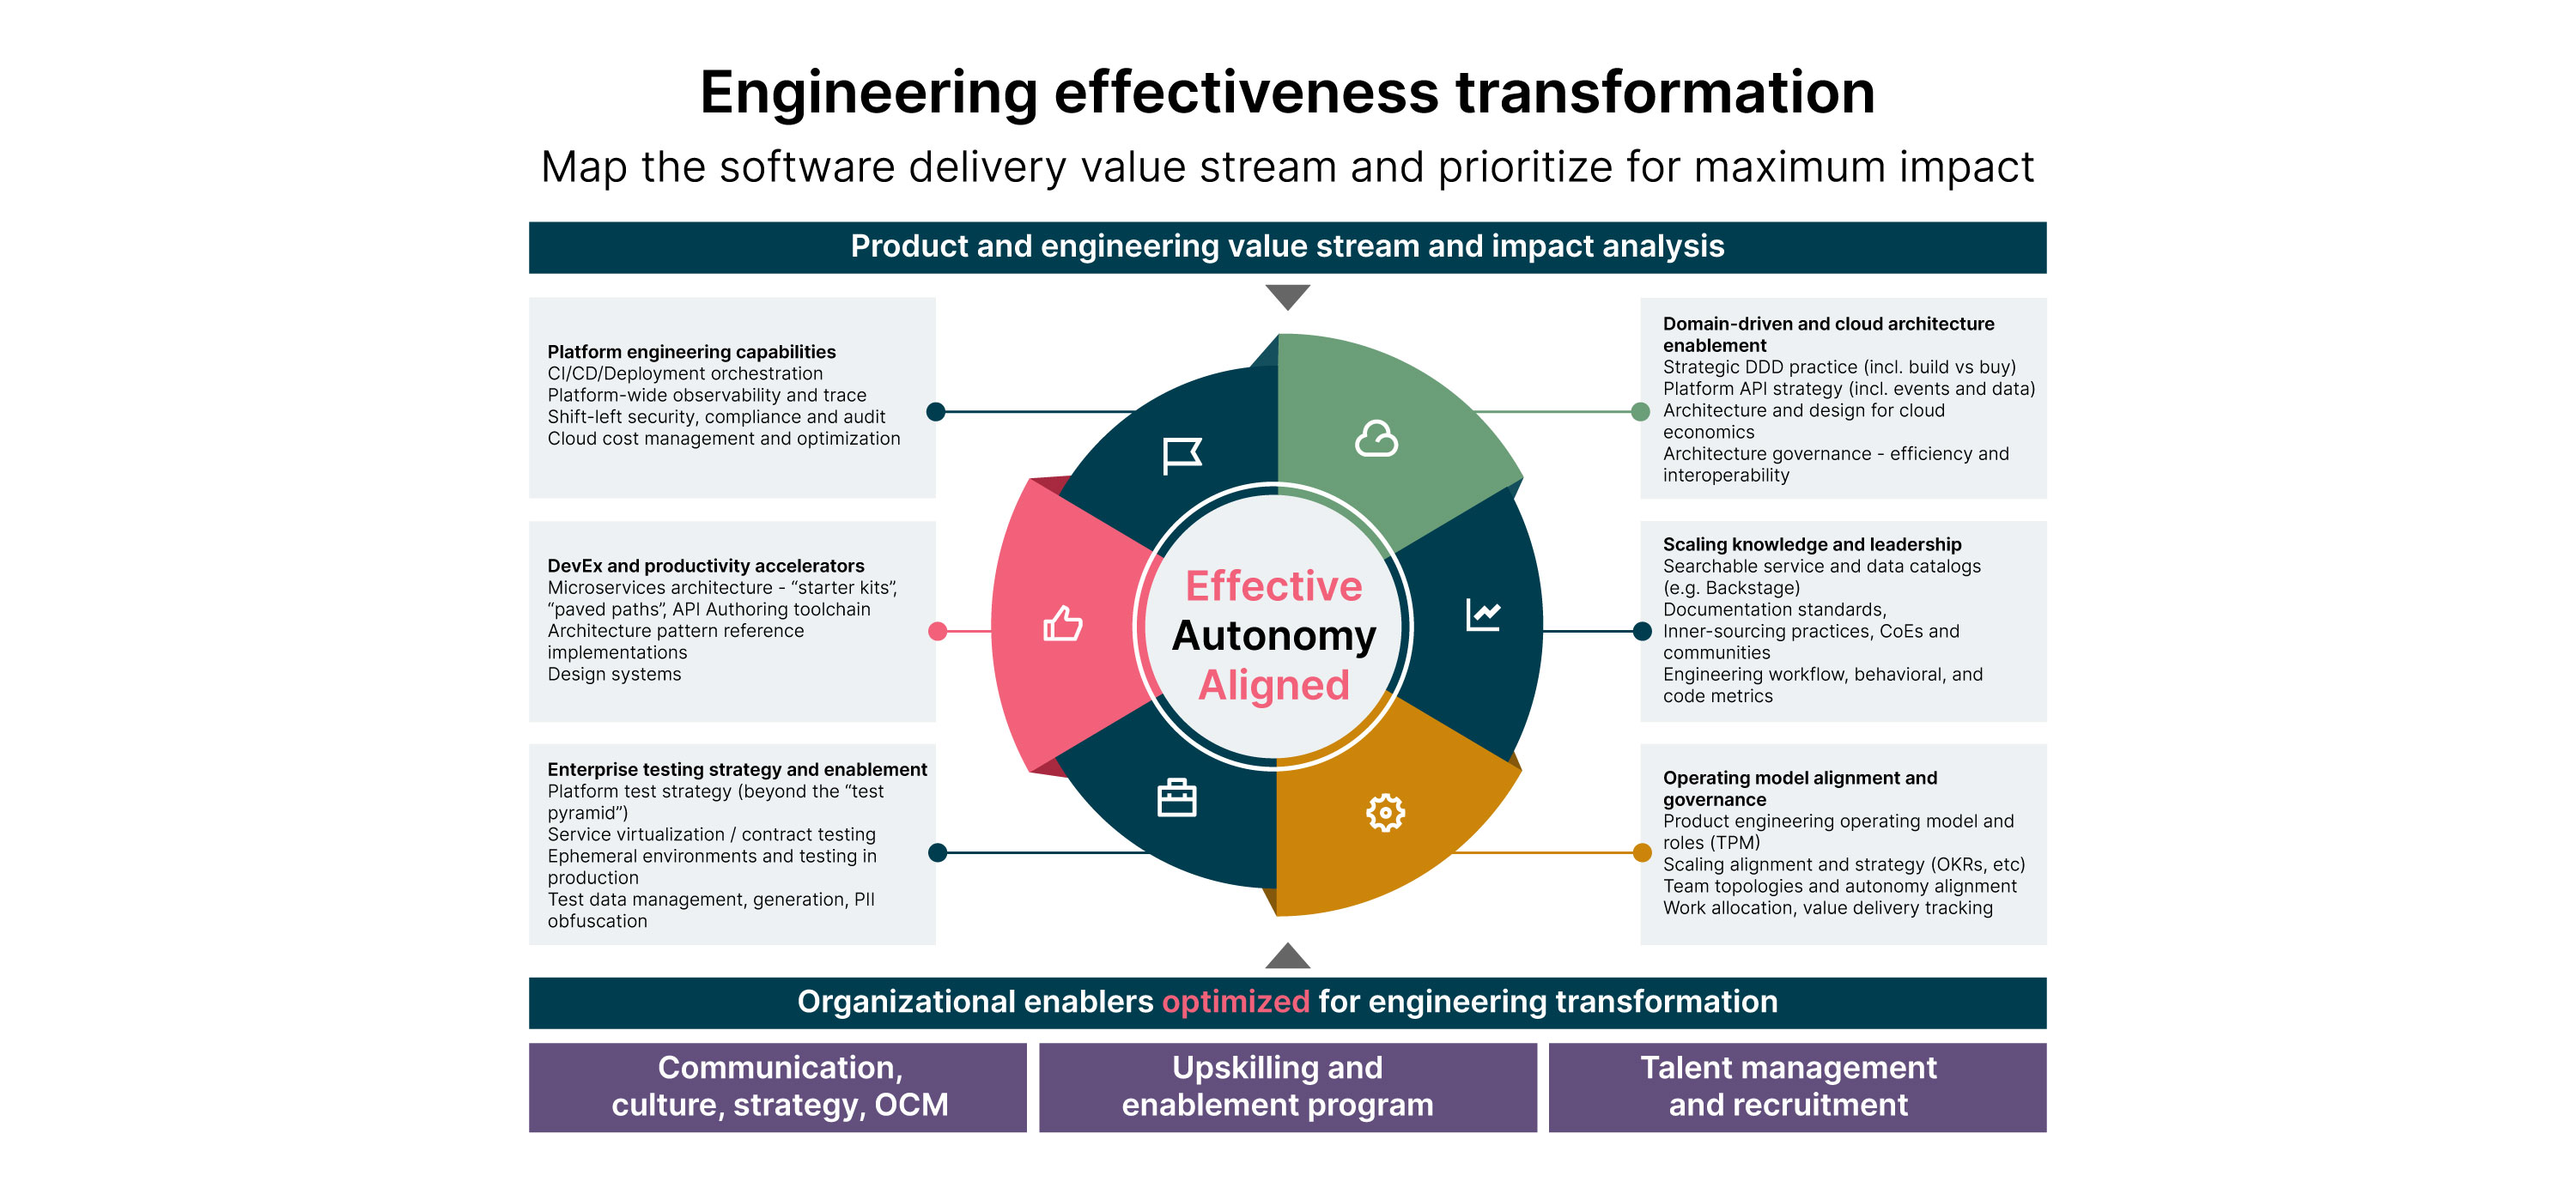 For maximum impact on your engineering effectiveness, organizations must consider the following elements:  Platform engineering capabilities, Developer productivity accelerators,  Enterprise testing enablement, Domain driven and cloud architecture enablement,  scaling knowledge and leadership, and Operating model alignment and governance 